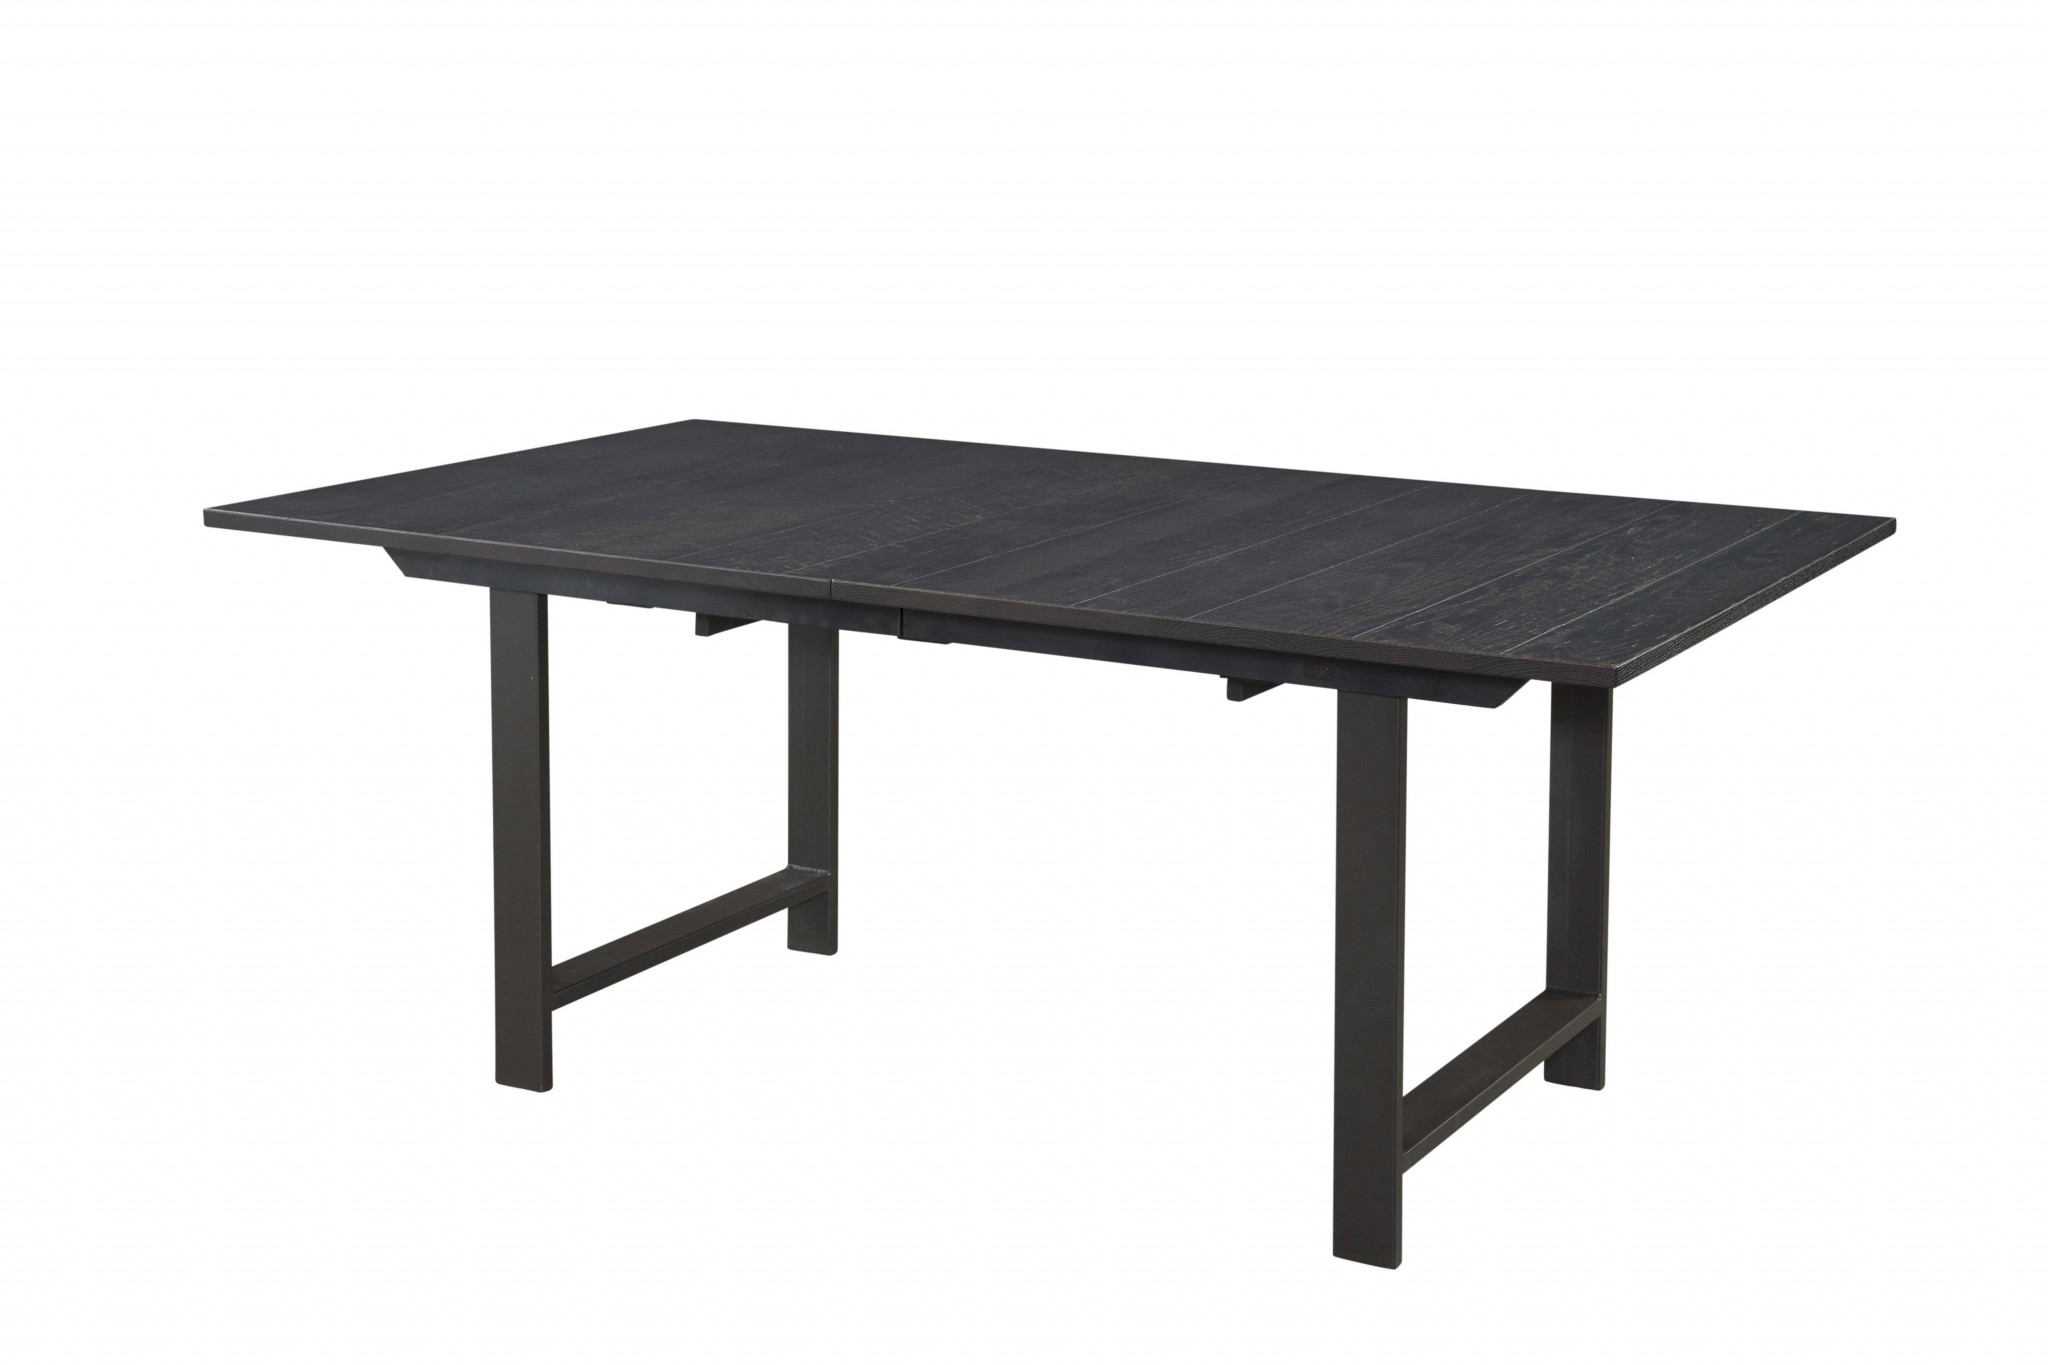 72" X 42" X 30" Charcoal Rough Cut Oak And Steel Reclaimed Saw Marks Table With 18" Leaf